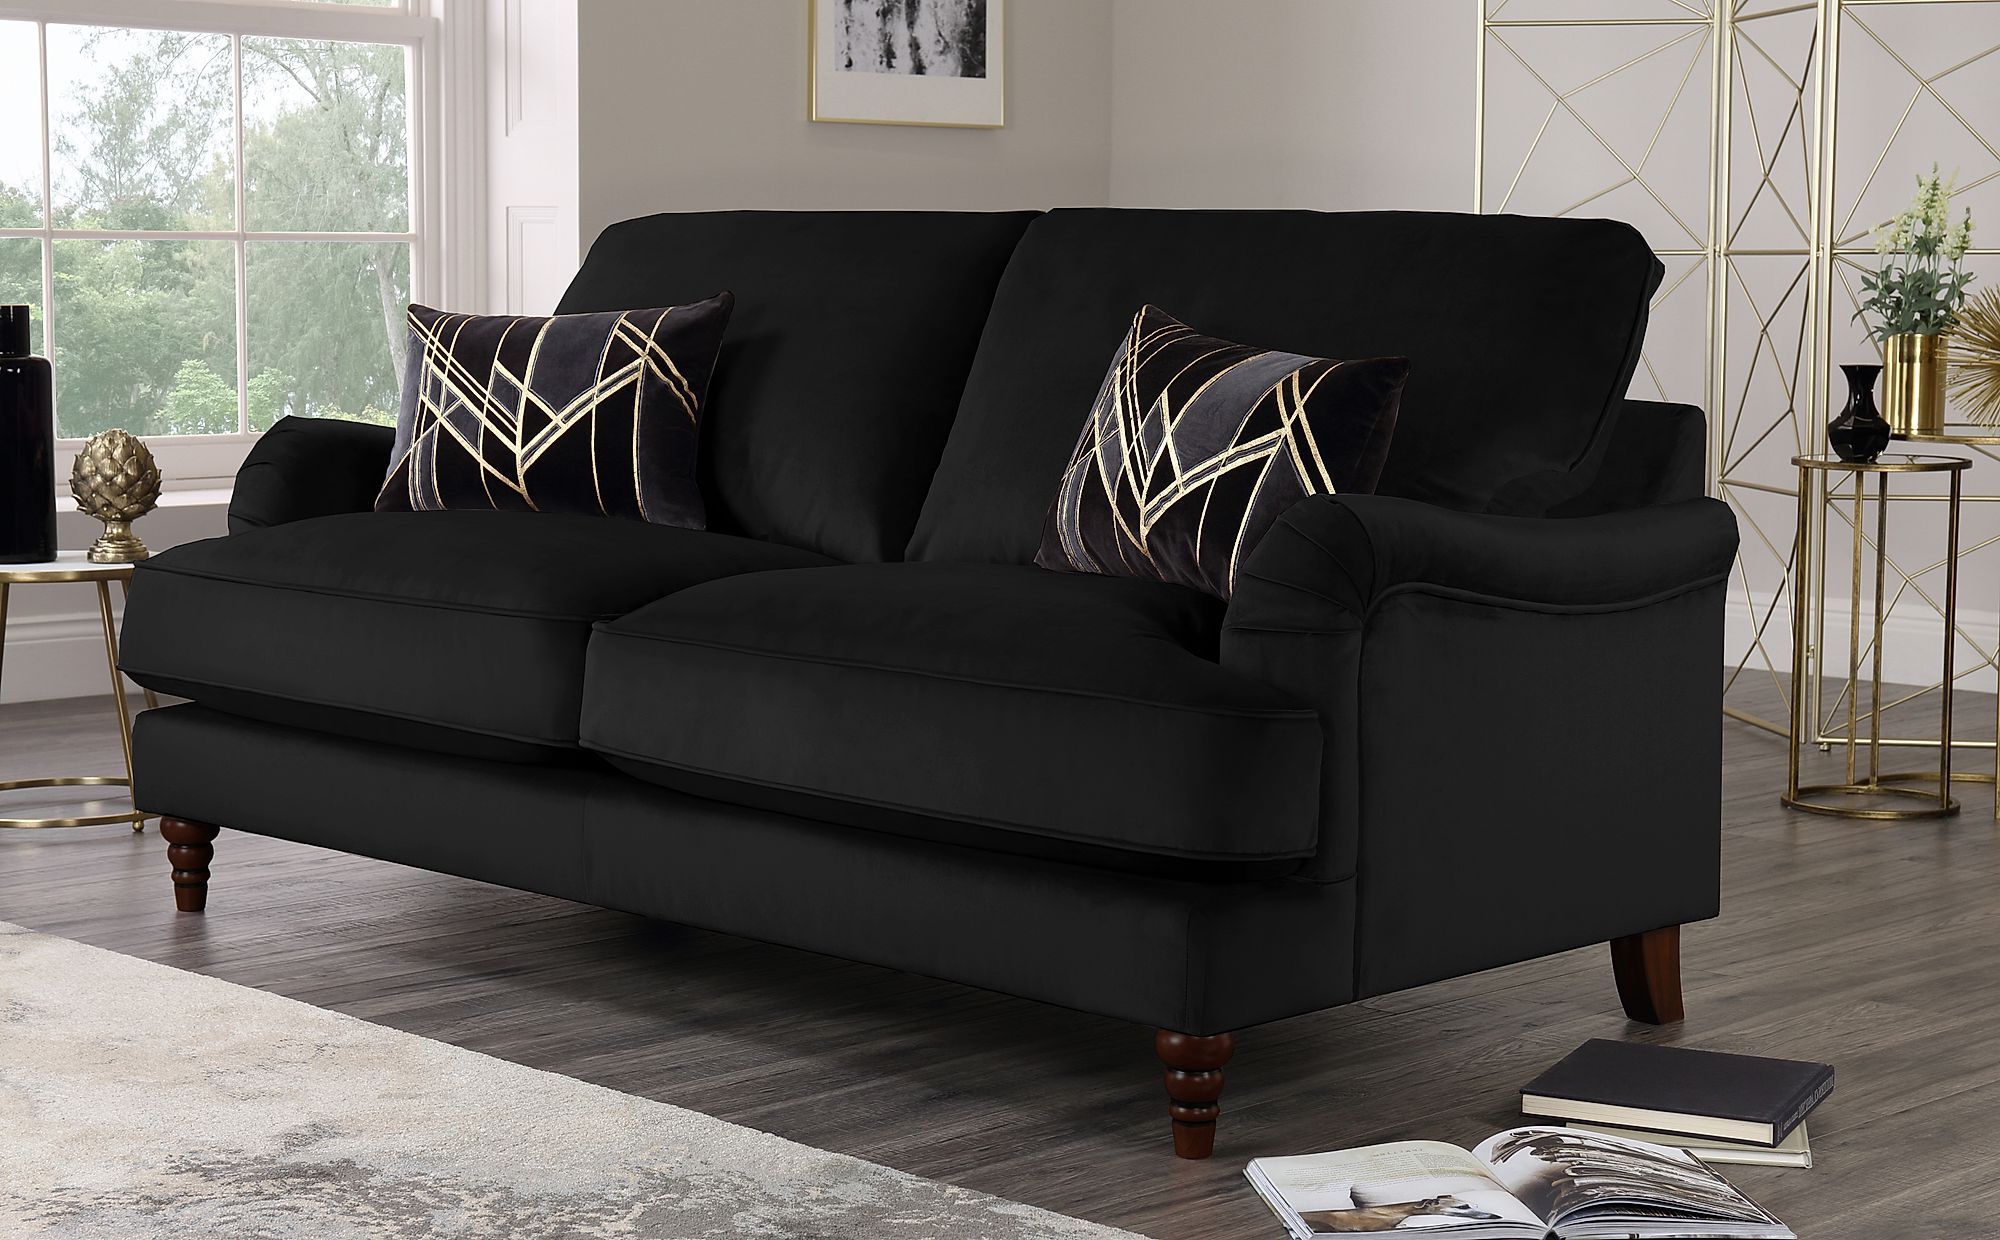 Furniture Choice With Fashionable Traditional Black Fabric Sofas (View 6 of 15)